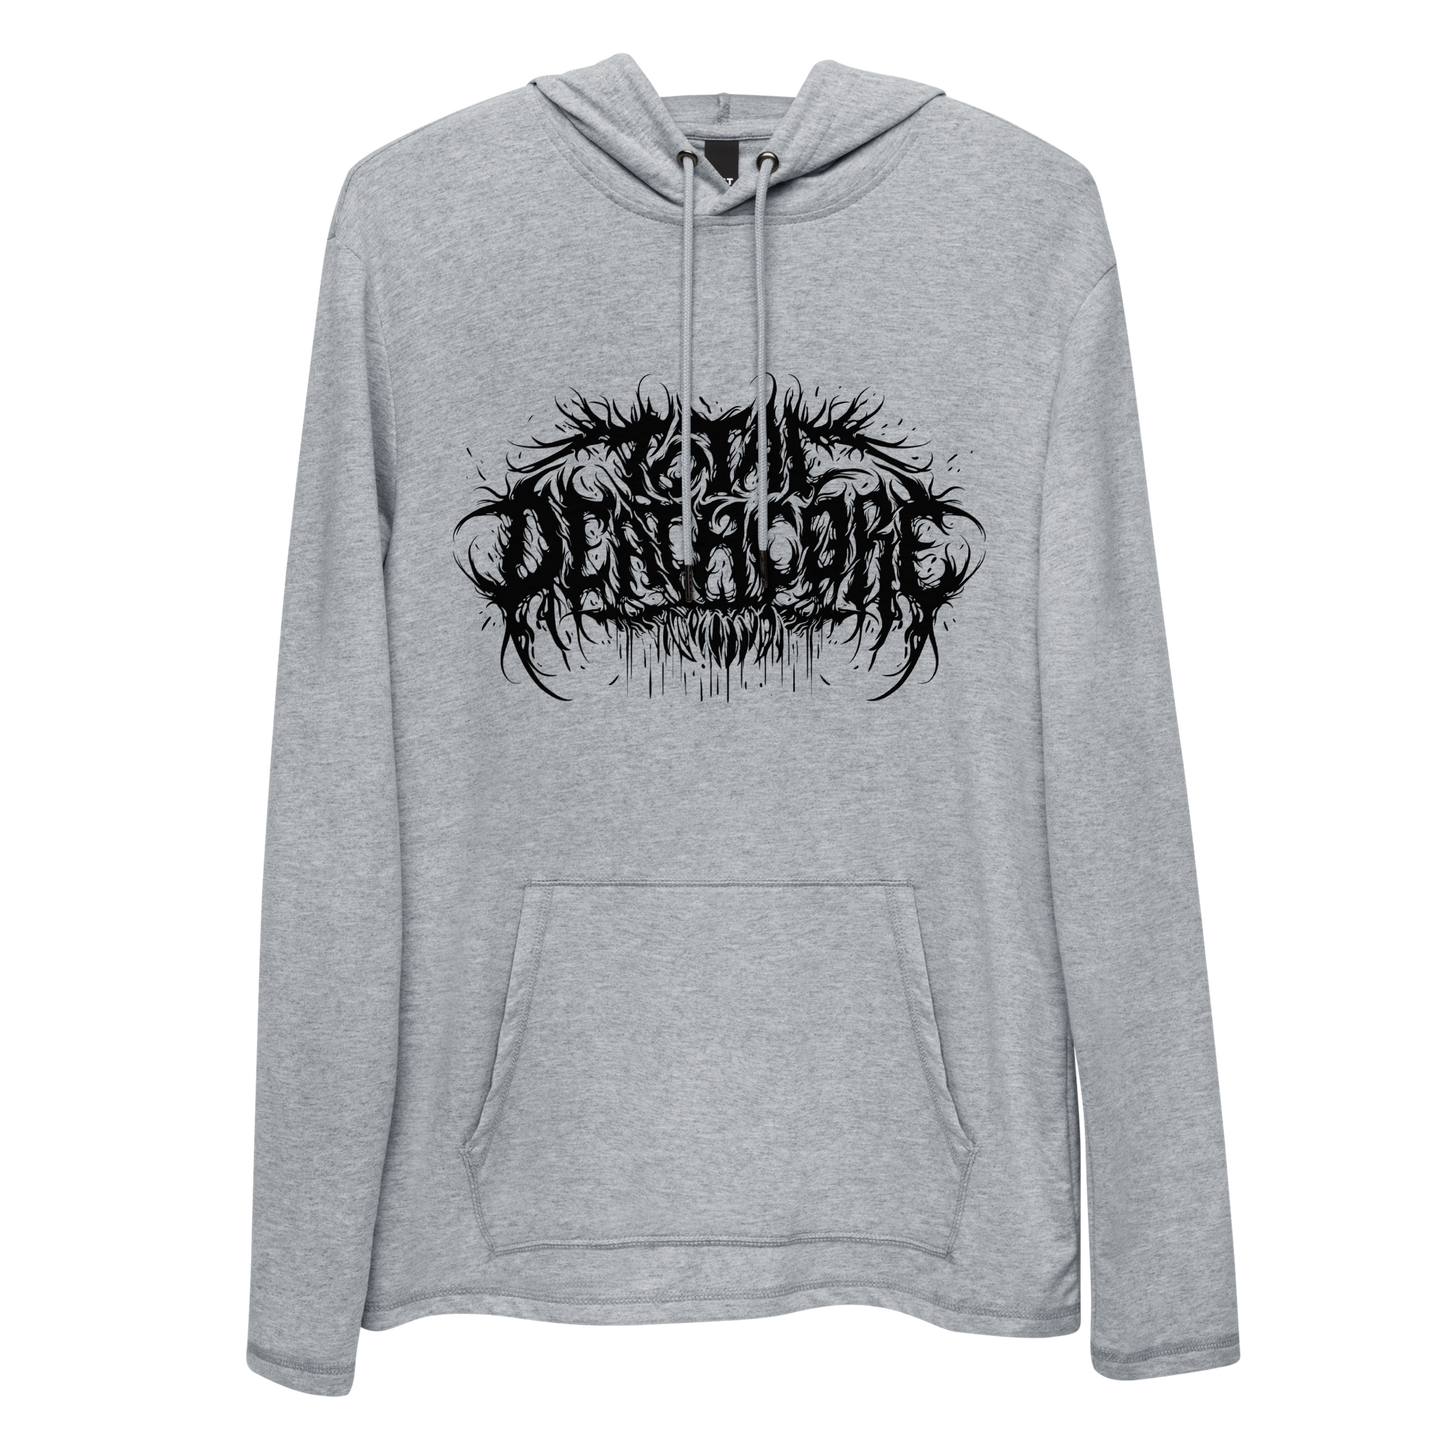 Total Deathcore "THE LOGO" - Unisex Lightweight Hoodie